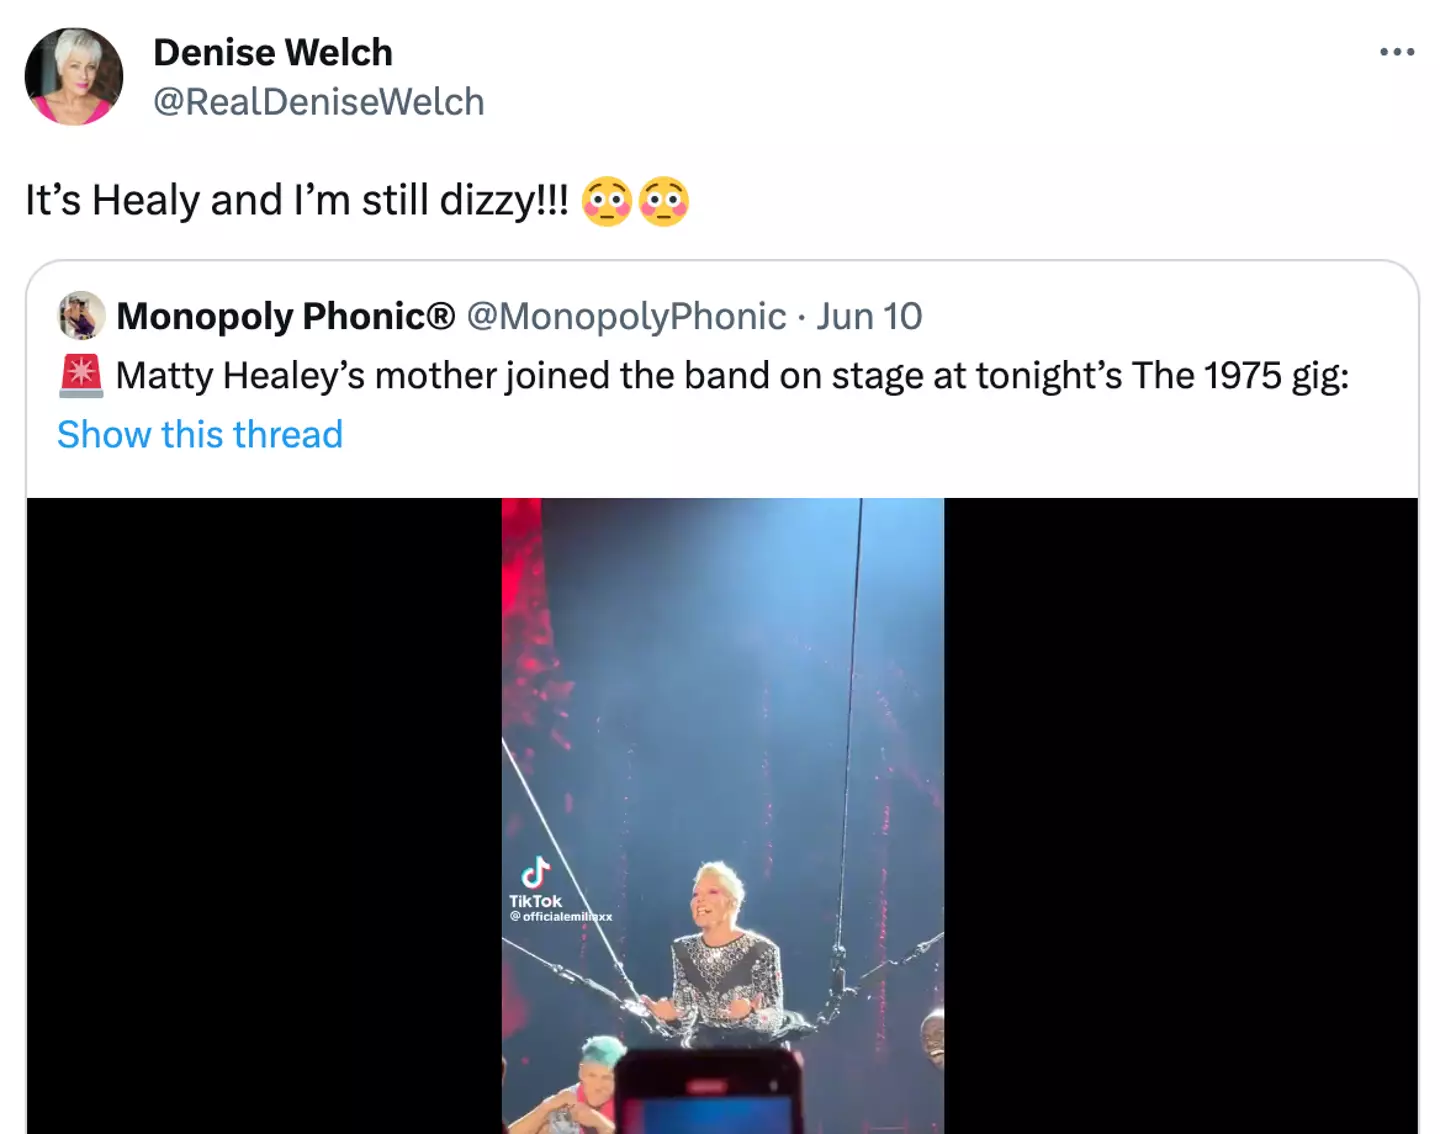 The video joked Denise Welch was at the gig.